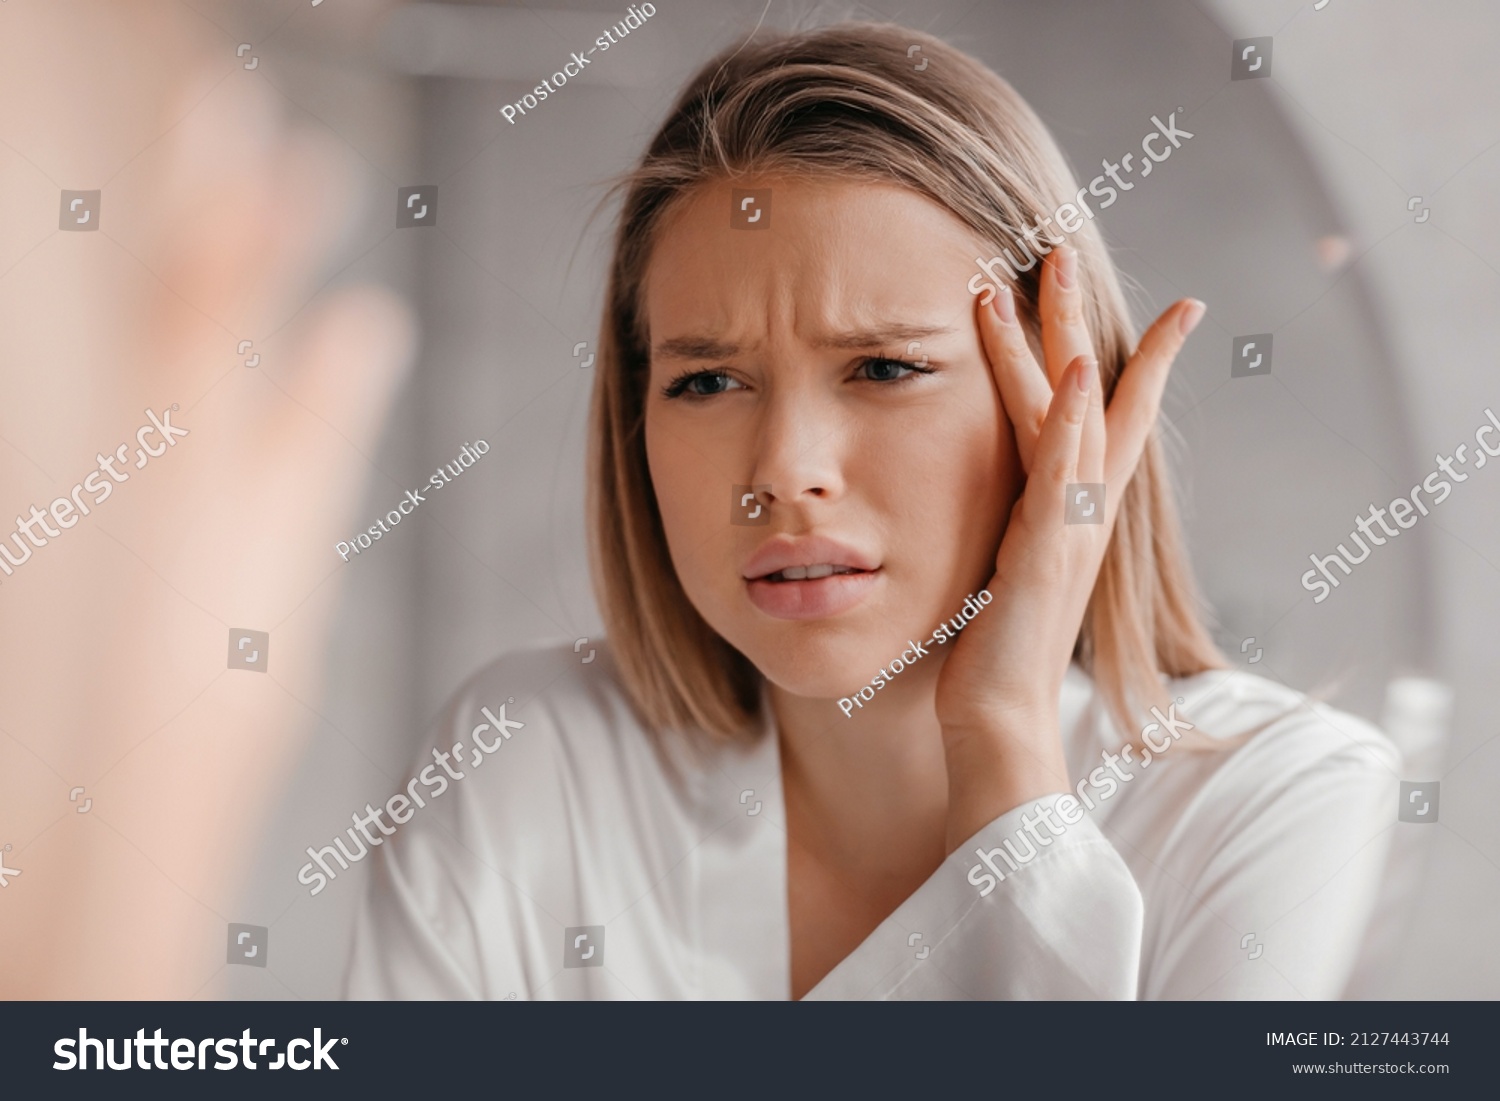 Mirror reflection of upset young lady looking at mirror and touching her forehead, having oily or dry skin problem, first wrinkles concept, bathroom interior #2127443744